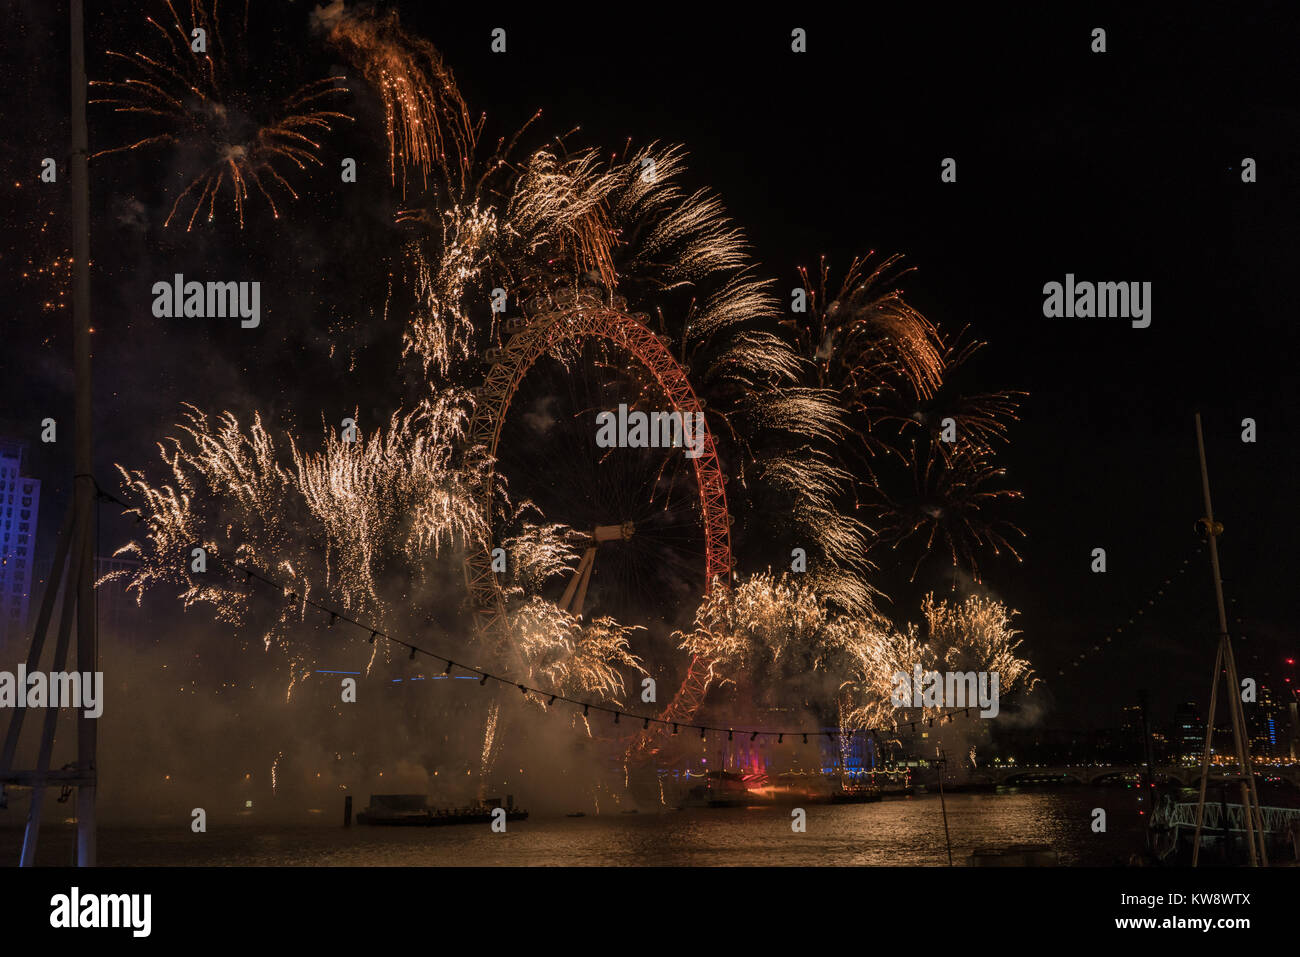 London, England, UK. 31 Dec 2017. Thousands attends the 2018 London’s New Year’s Eve fireworks at the Embankment. Stock Photo